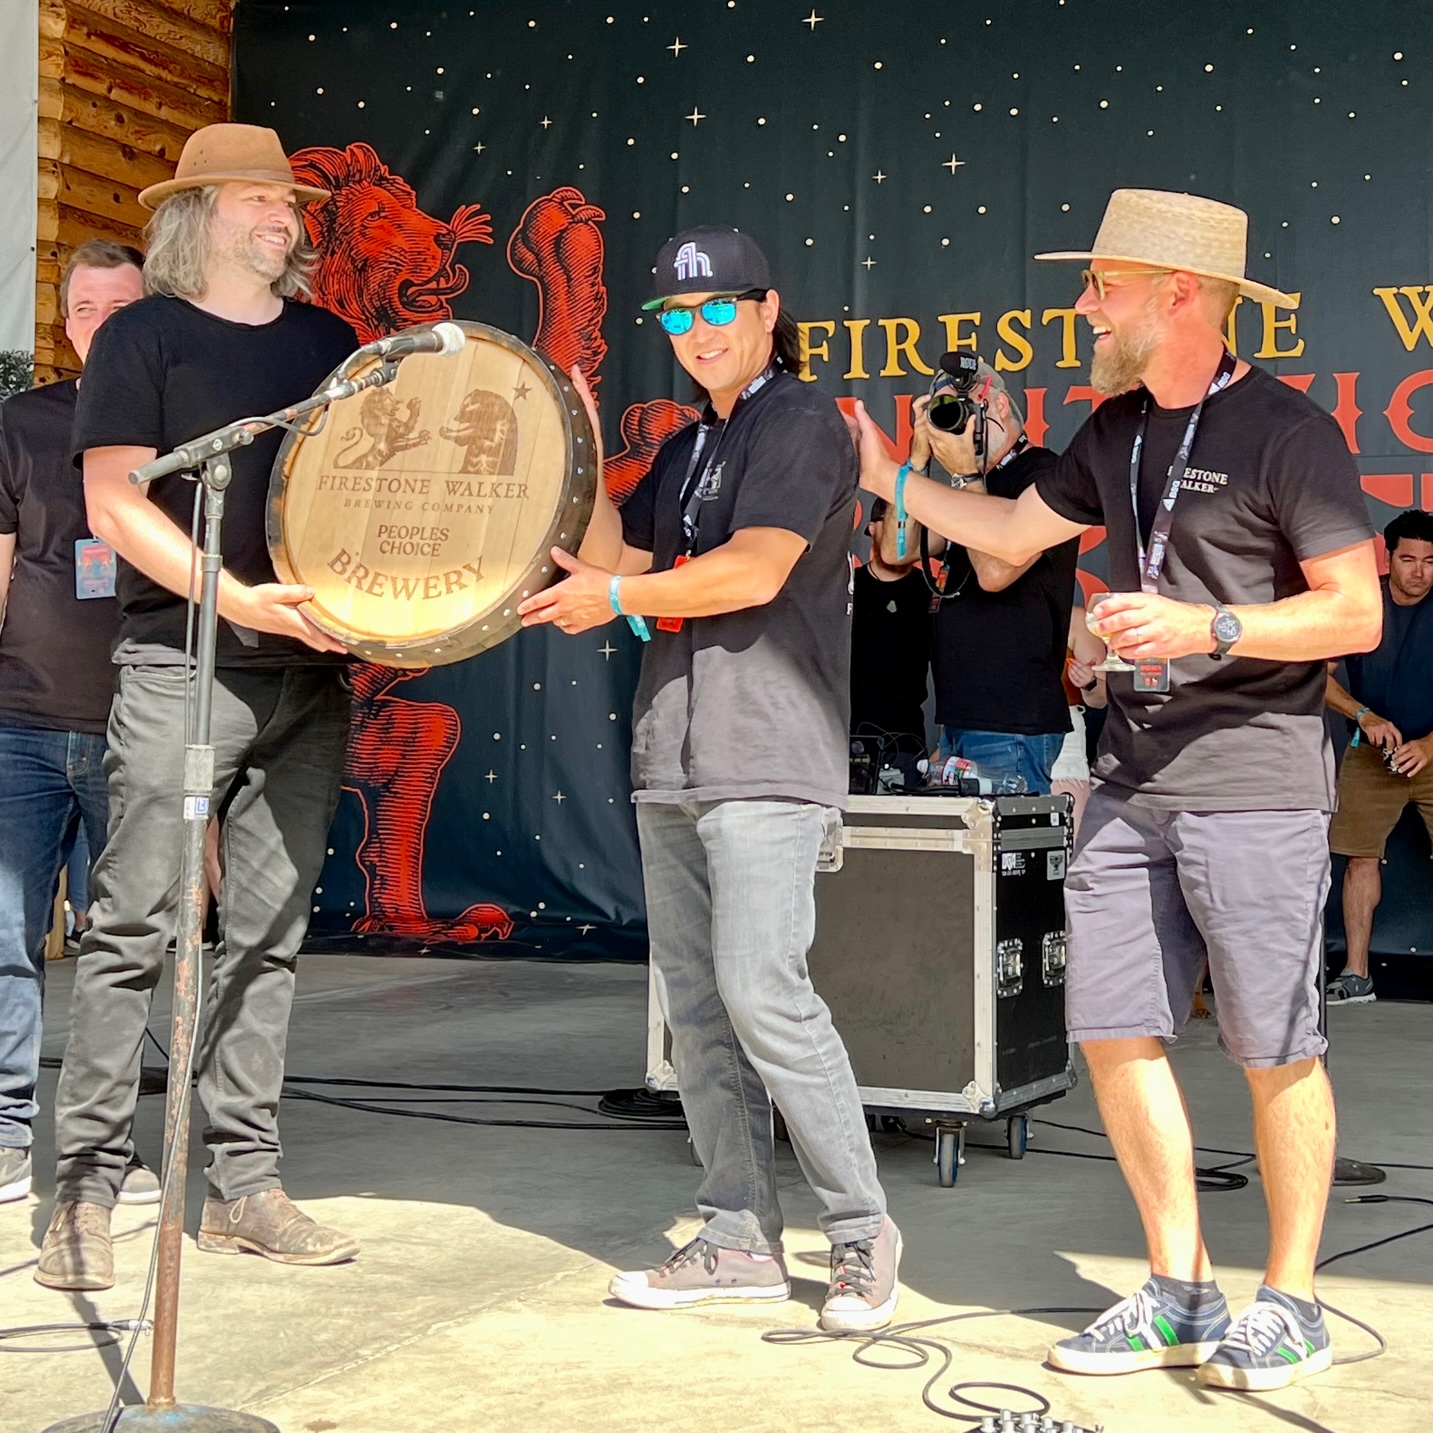 Matt Brynildson presenting Garage Project with the People's Choice Award at the 2022 Firestone Walker Invitational Beer Fest.